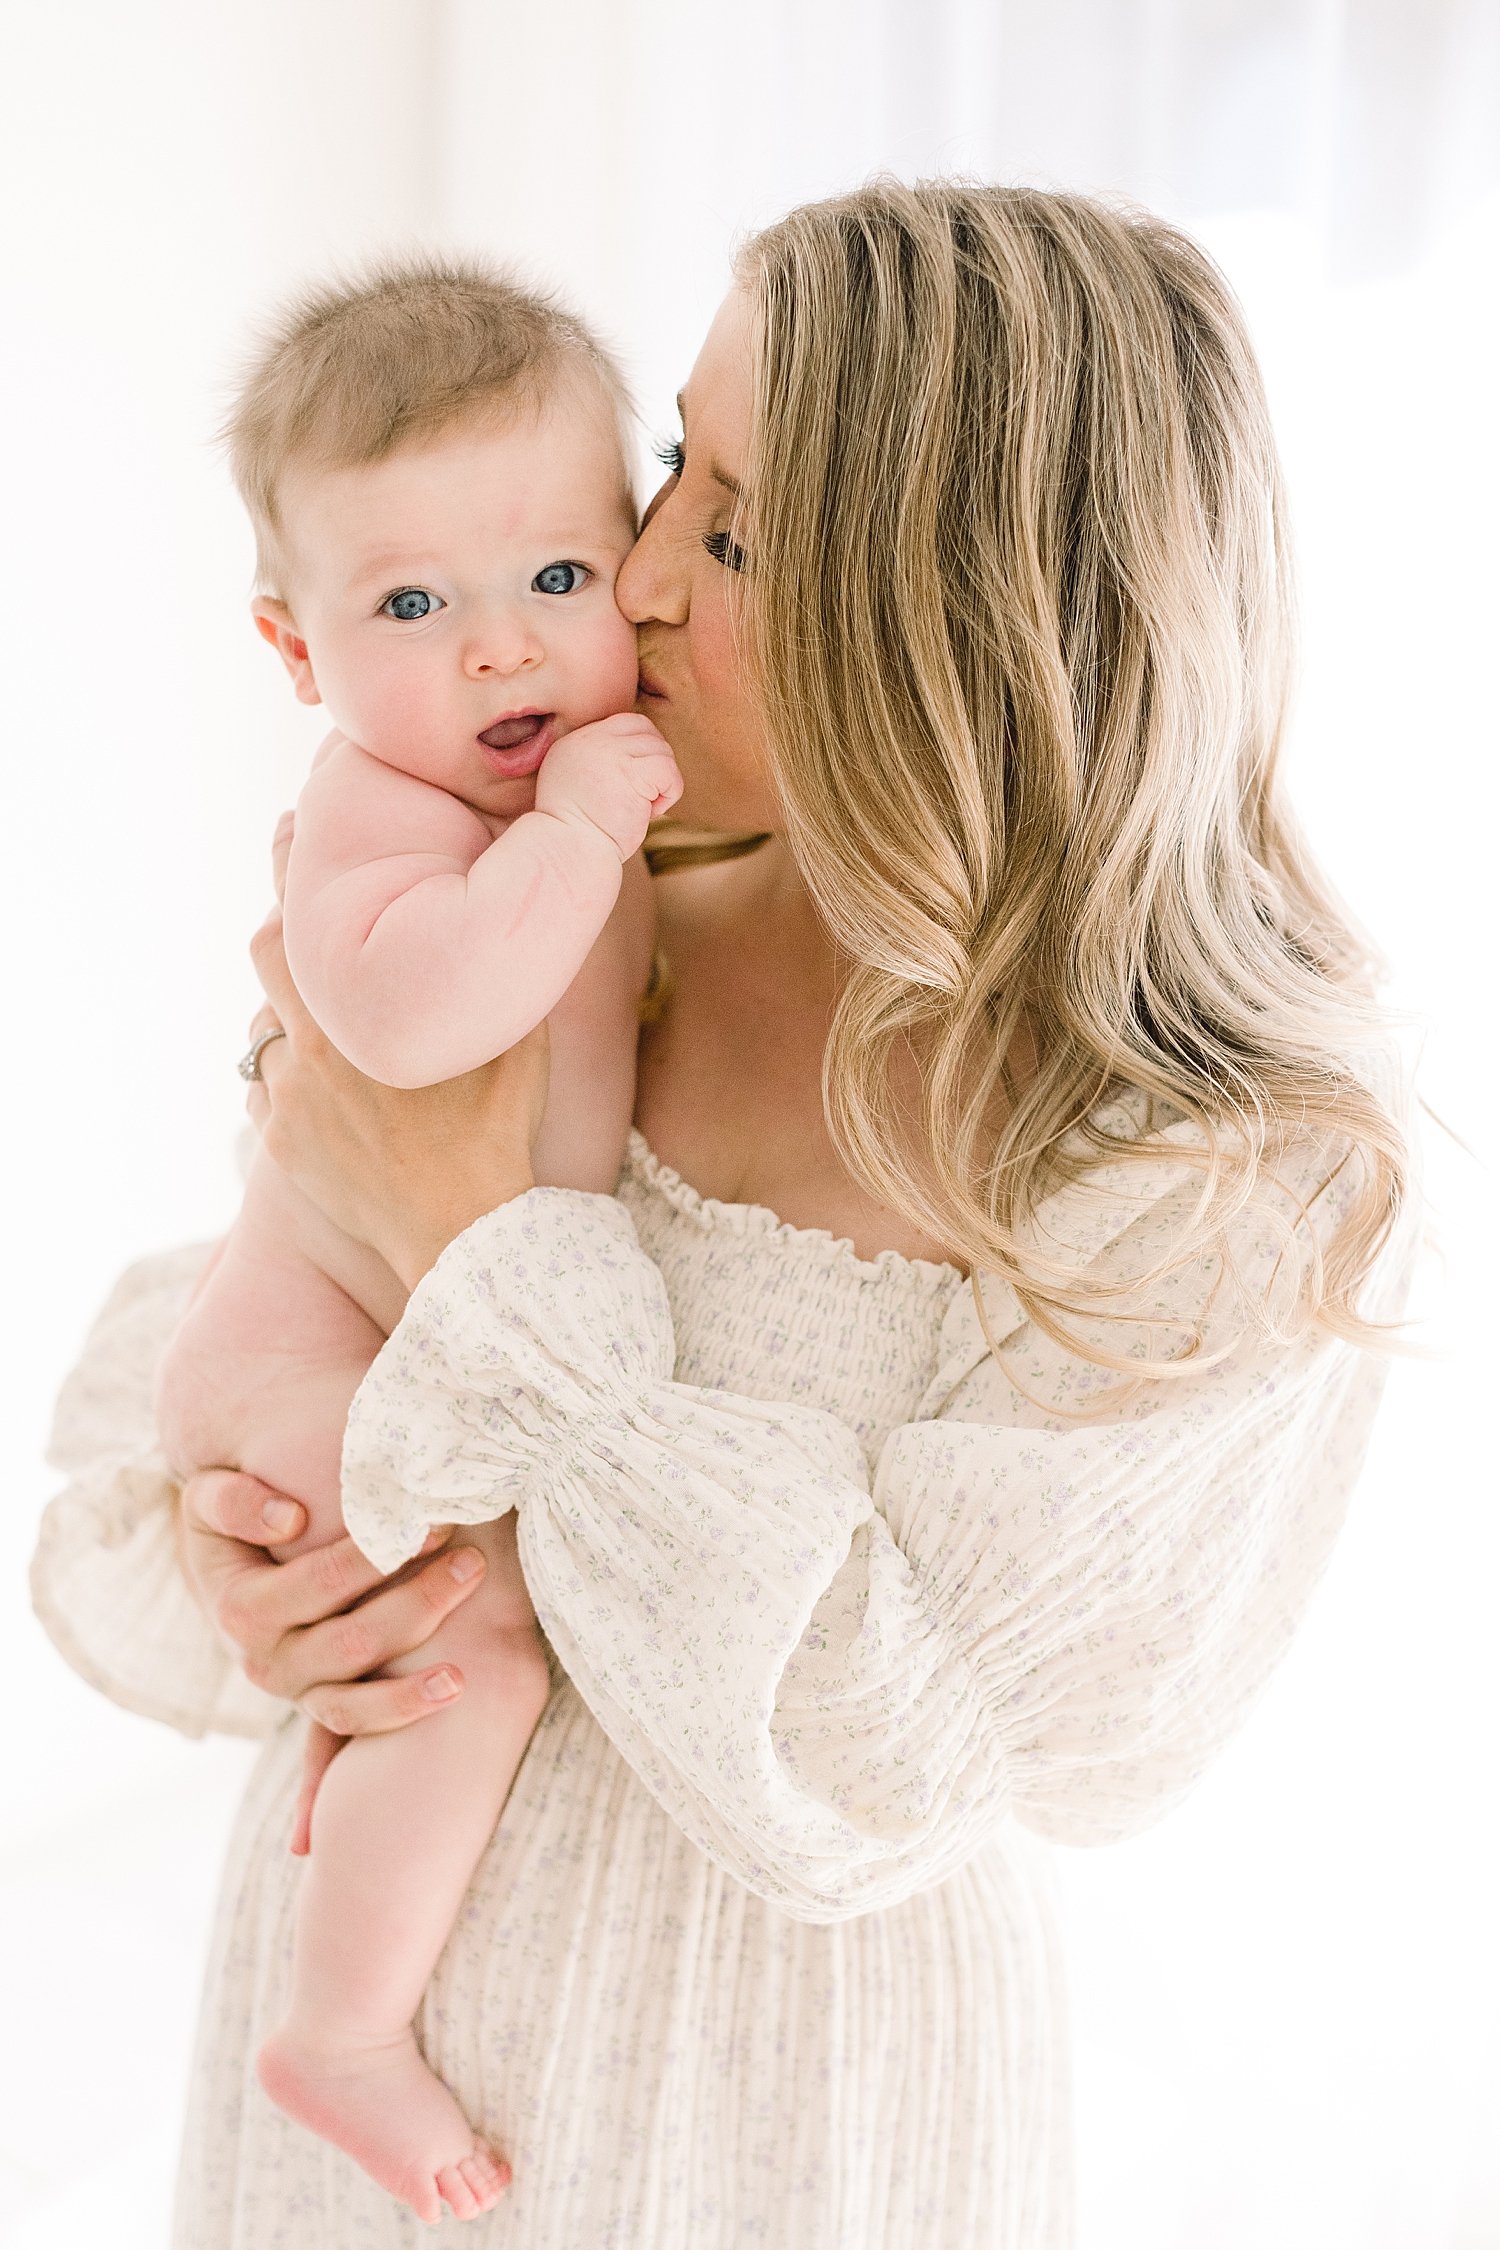 Mom and her baby boy at six months old | Ambre Williams Photography